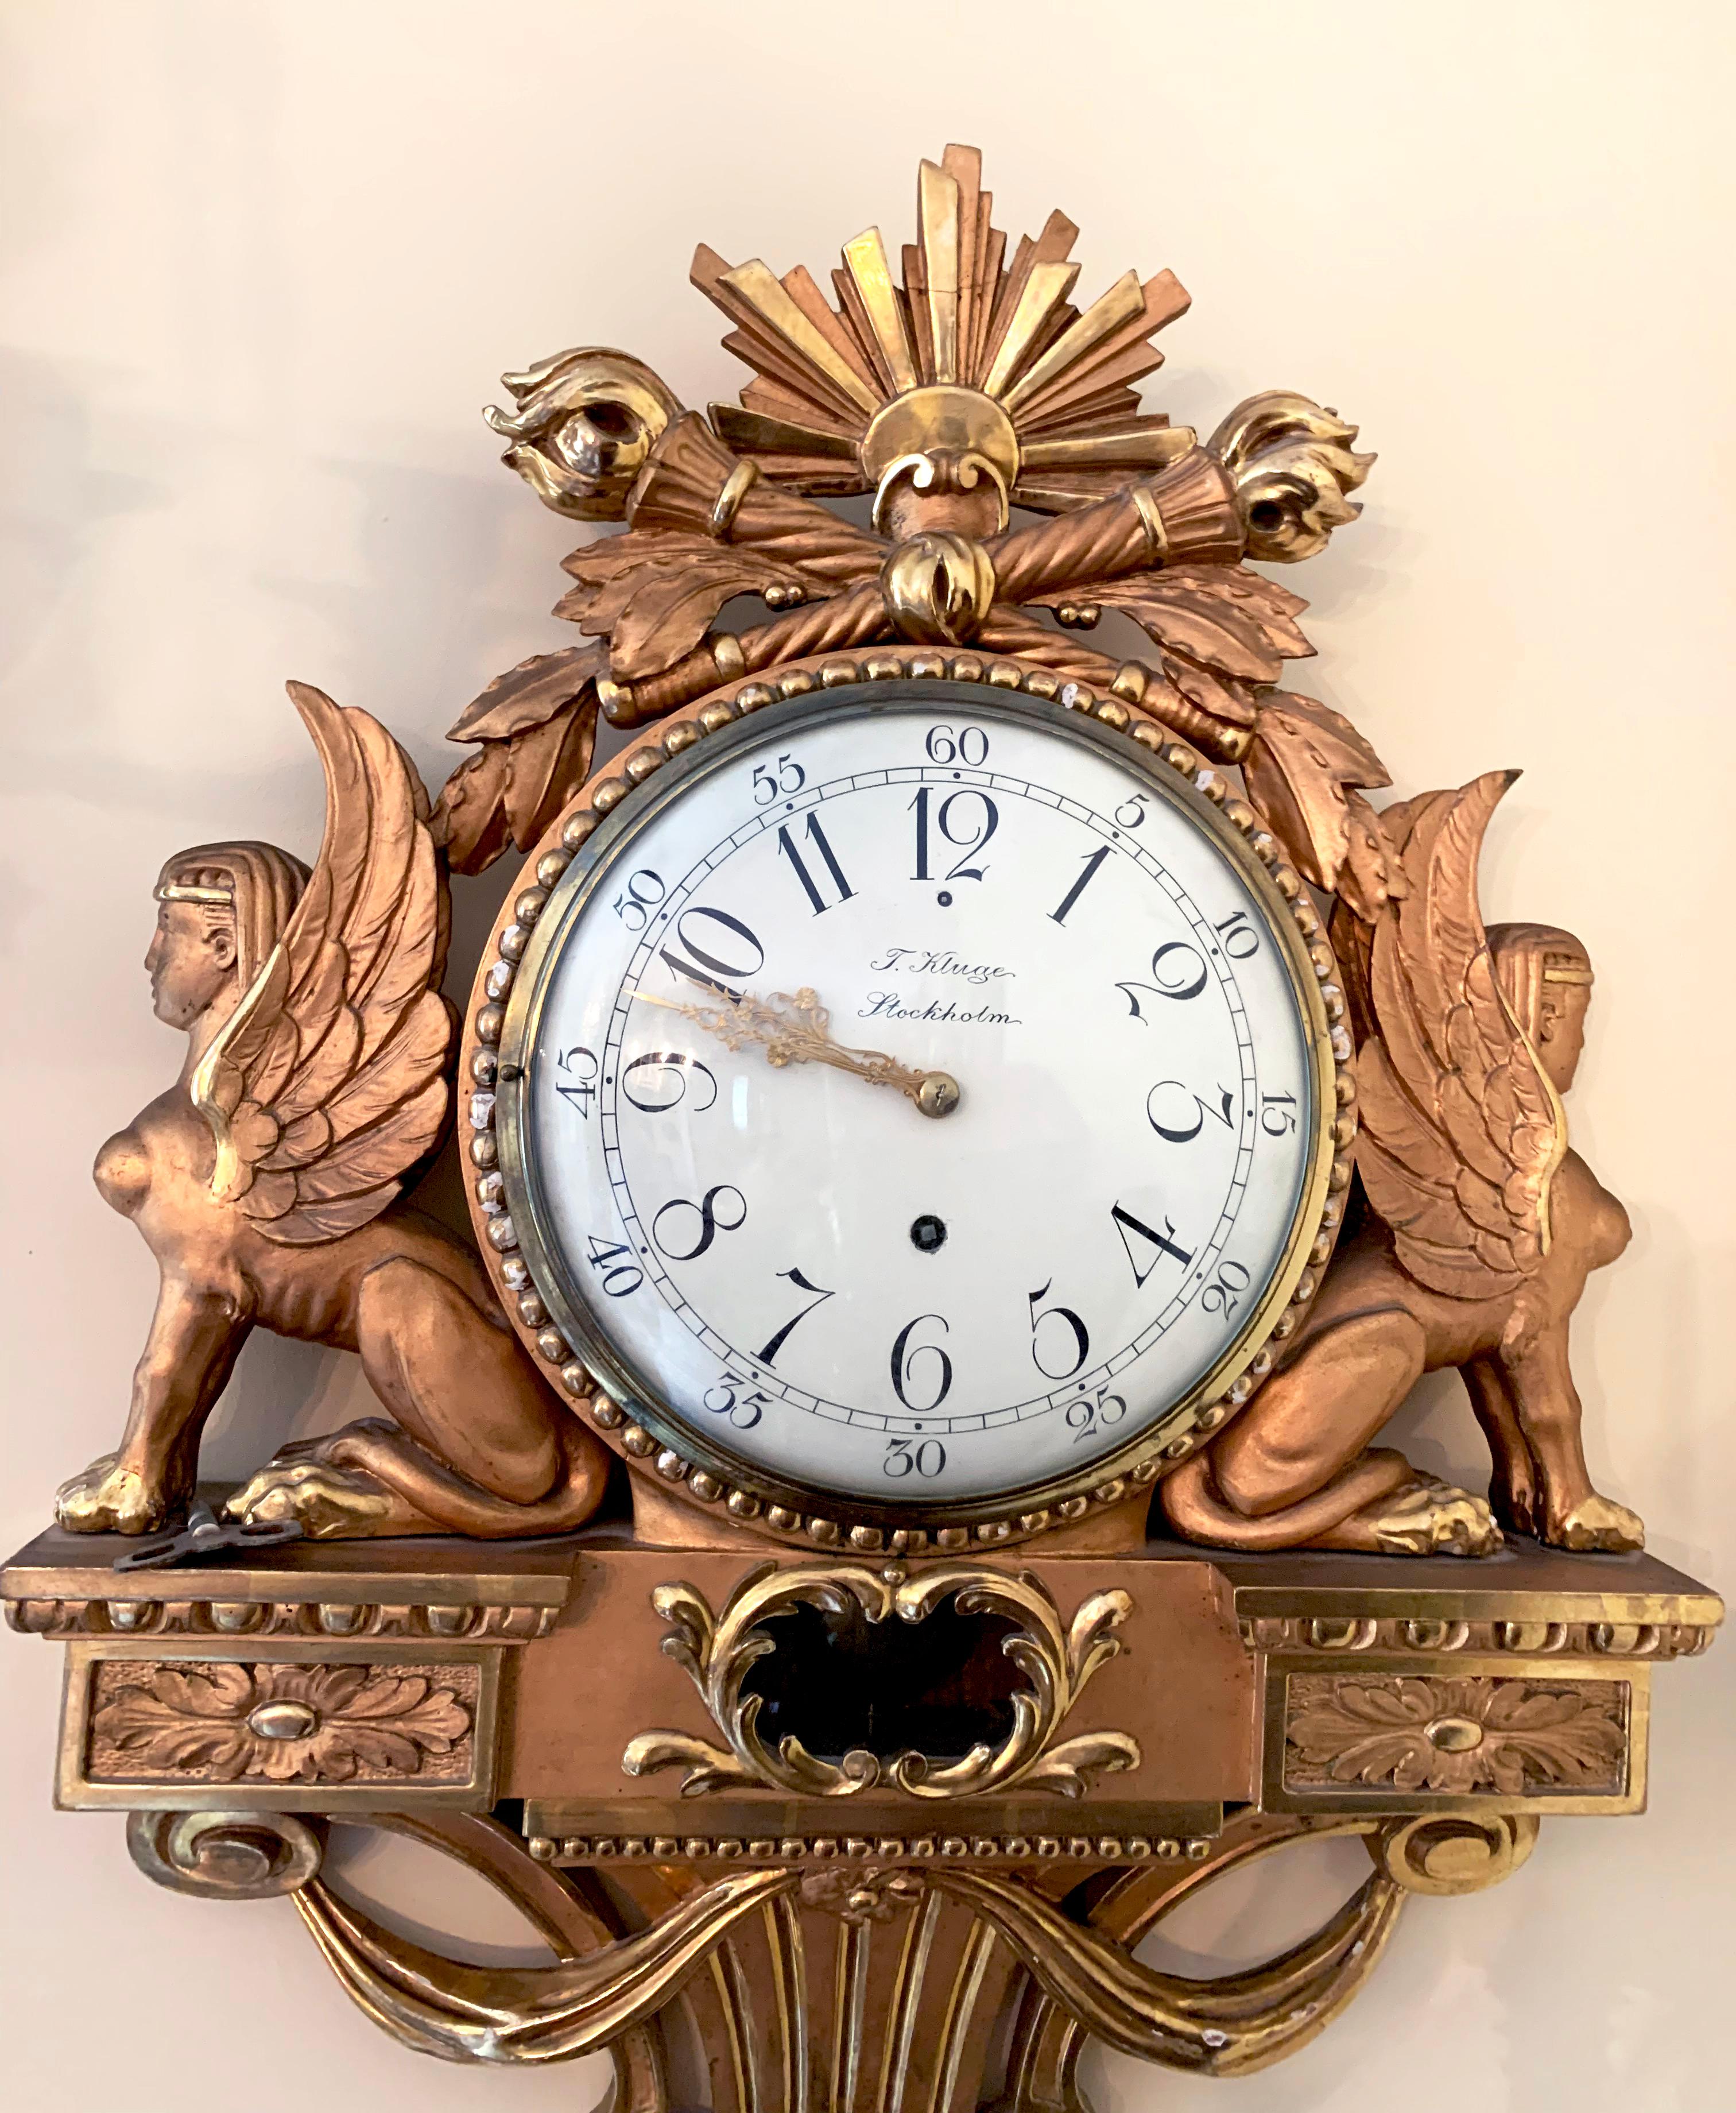 A beautiful 19th century Empire clock gilded with sphinxes sitting on each side. Signed with T Kluge Stockholm at the back. 
Black and white domed dial with golden needles. A very decorative piece from the time in a great condition.